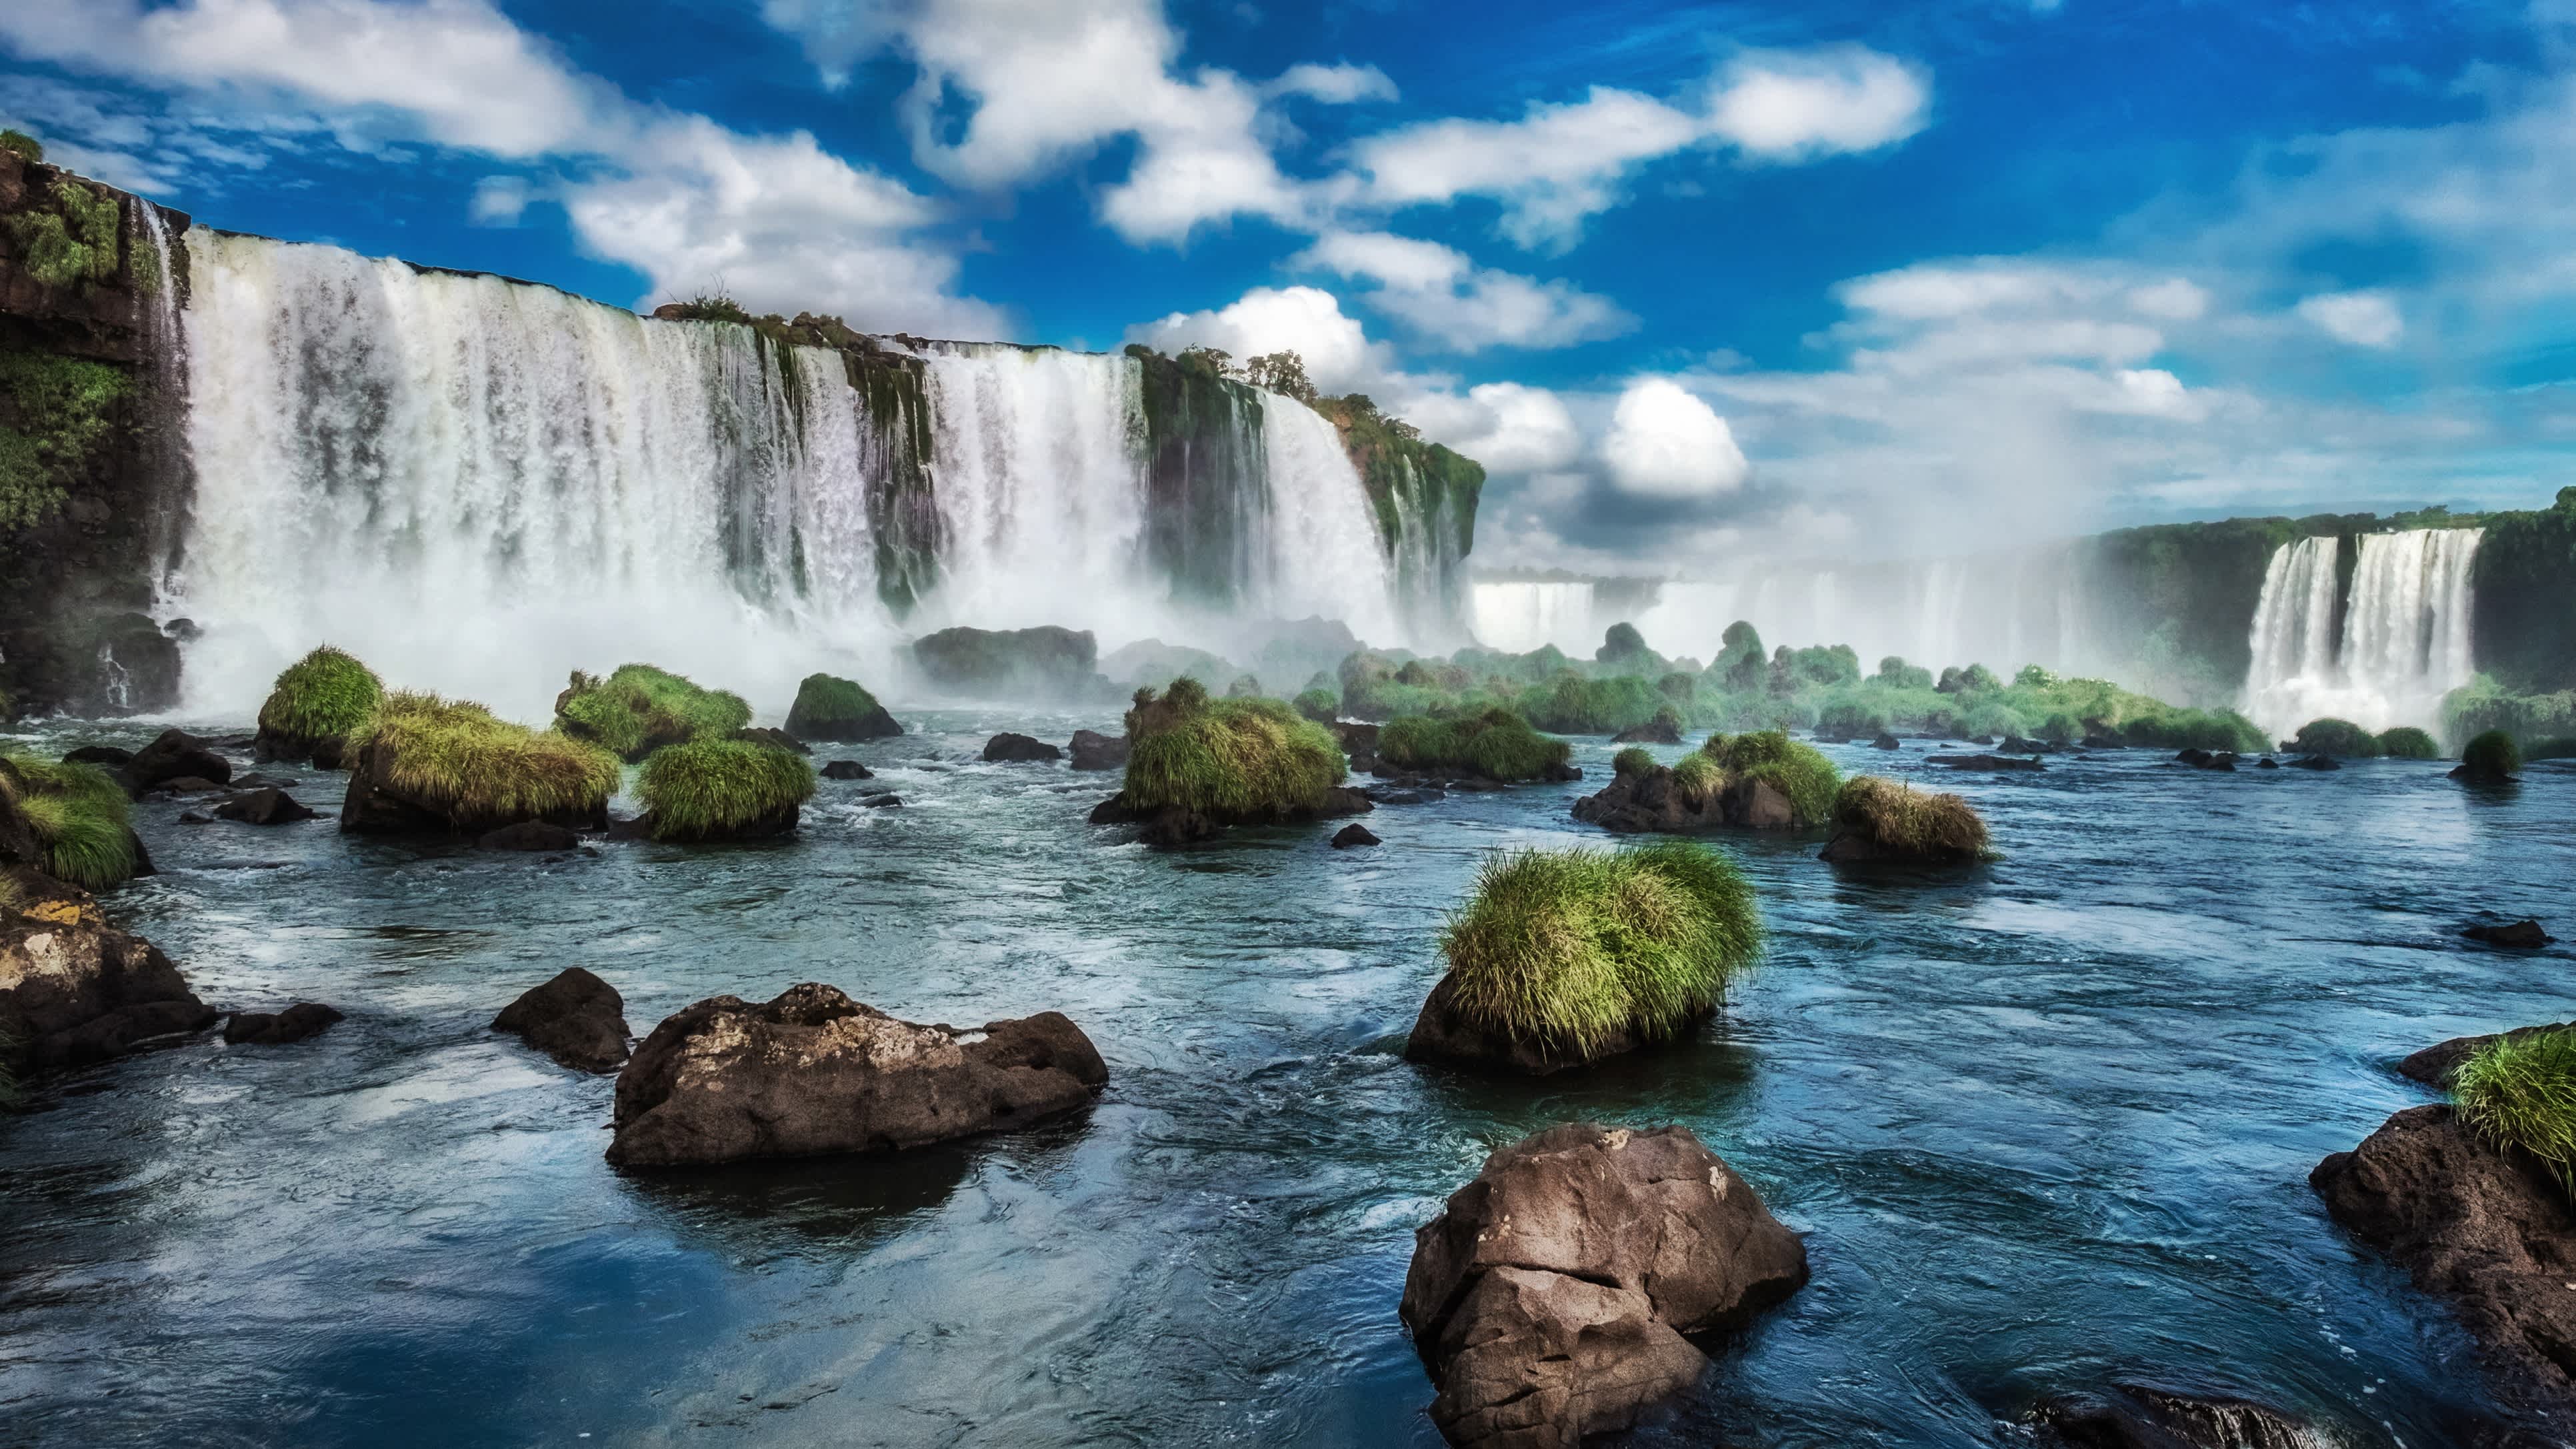 Visit the extraordinary natural wonder that is Igauzu Falls waterfall, pictured here, on an Argentina tour